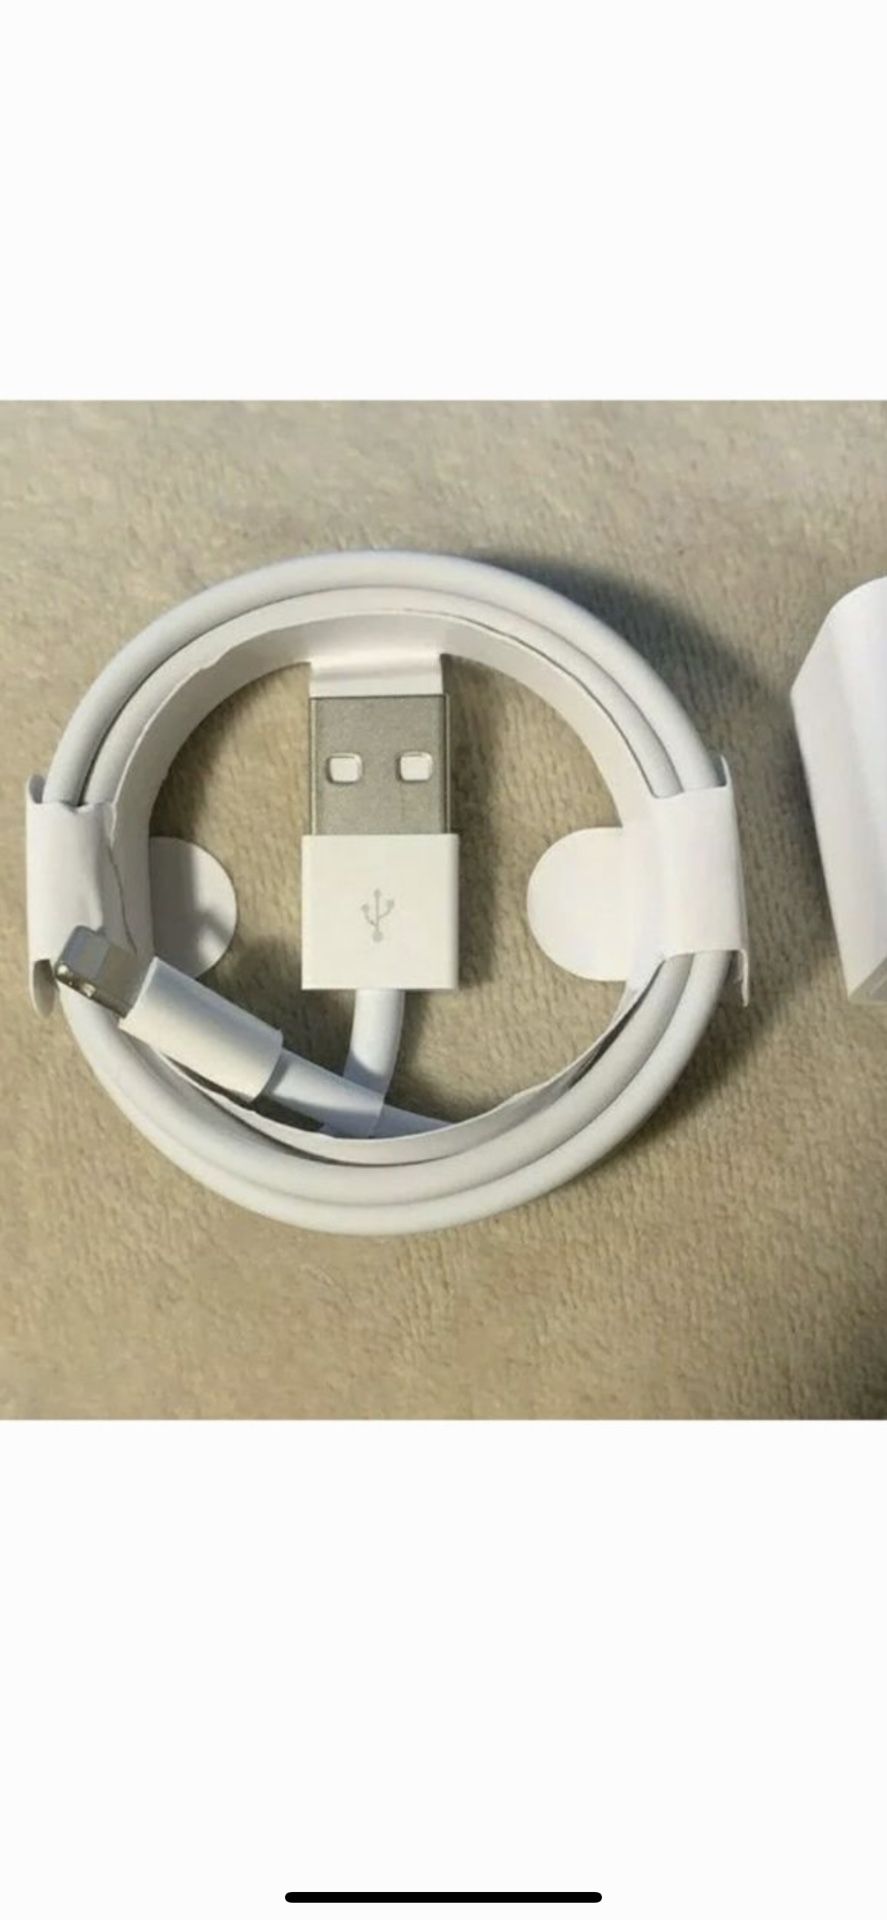 Brand New Original Apple iPhone charger